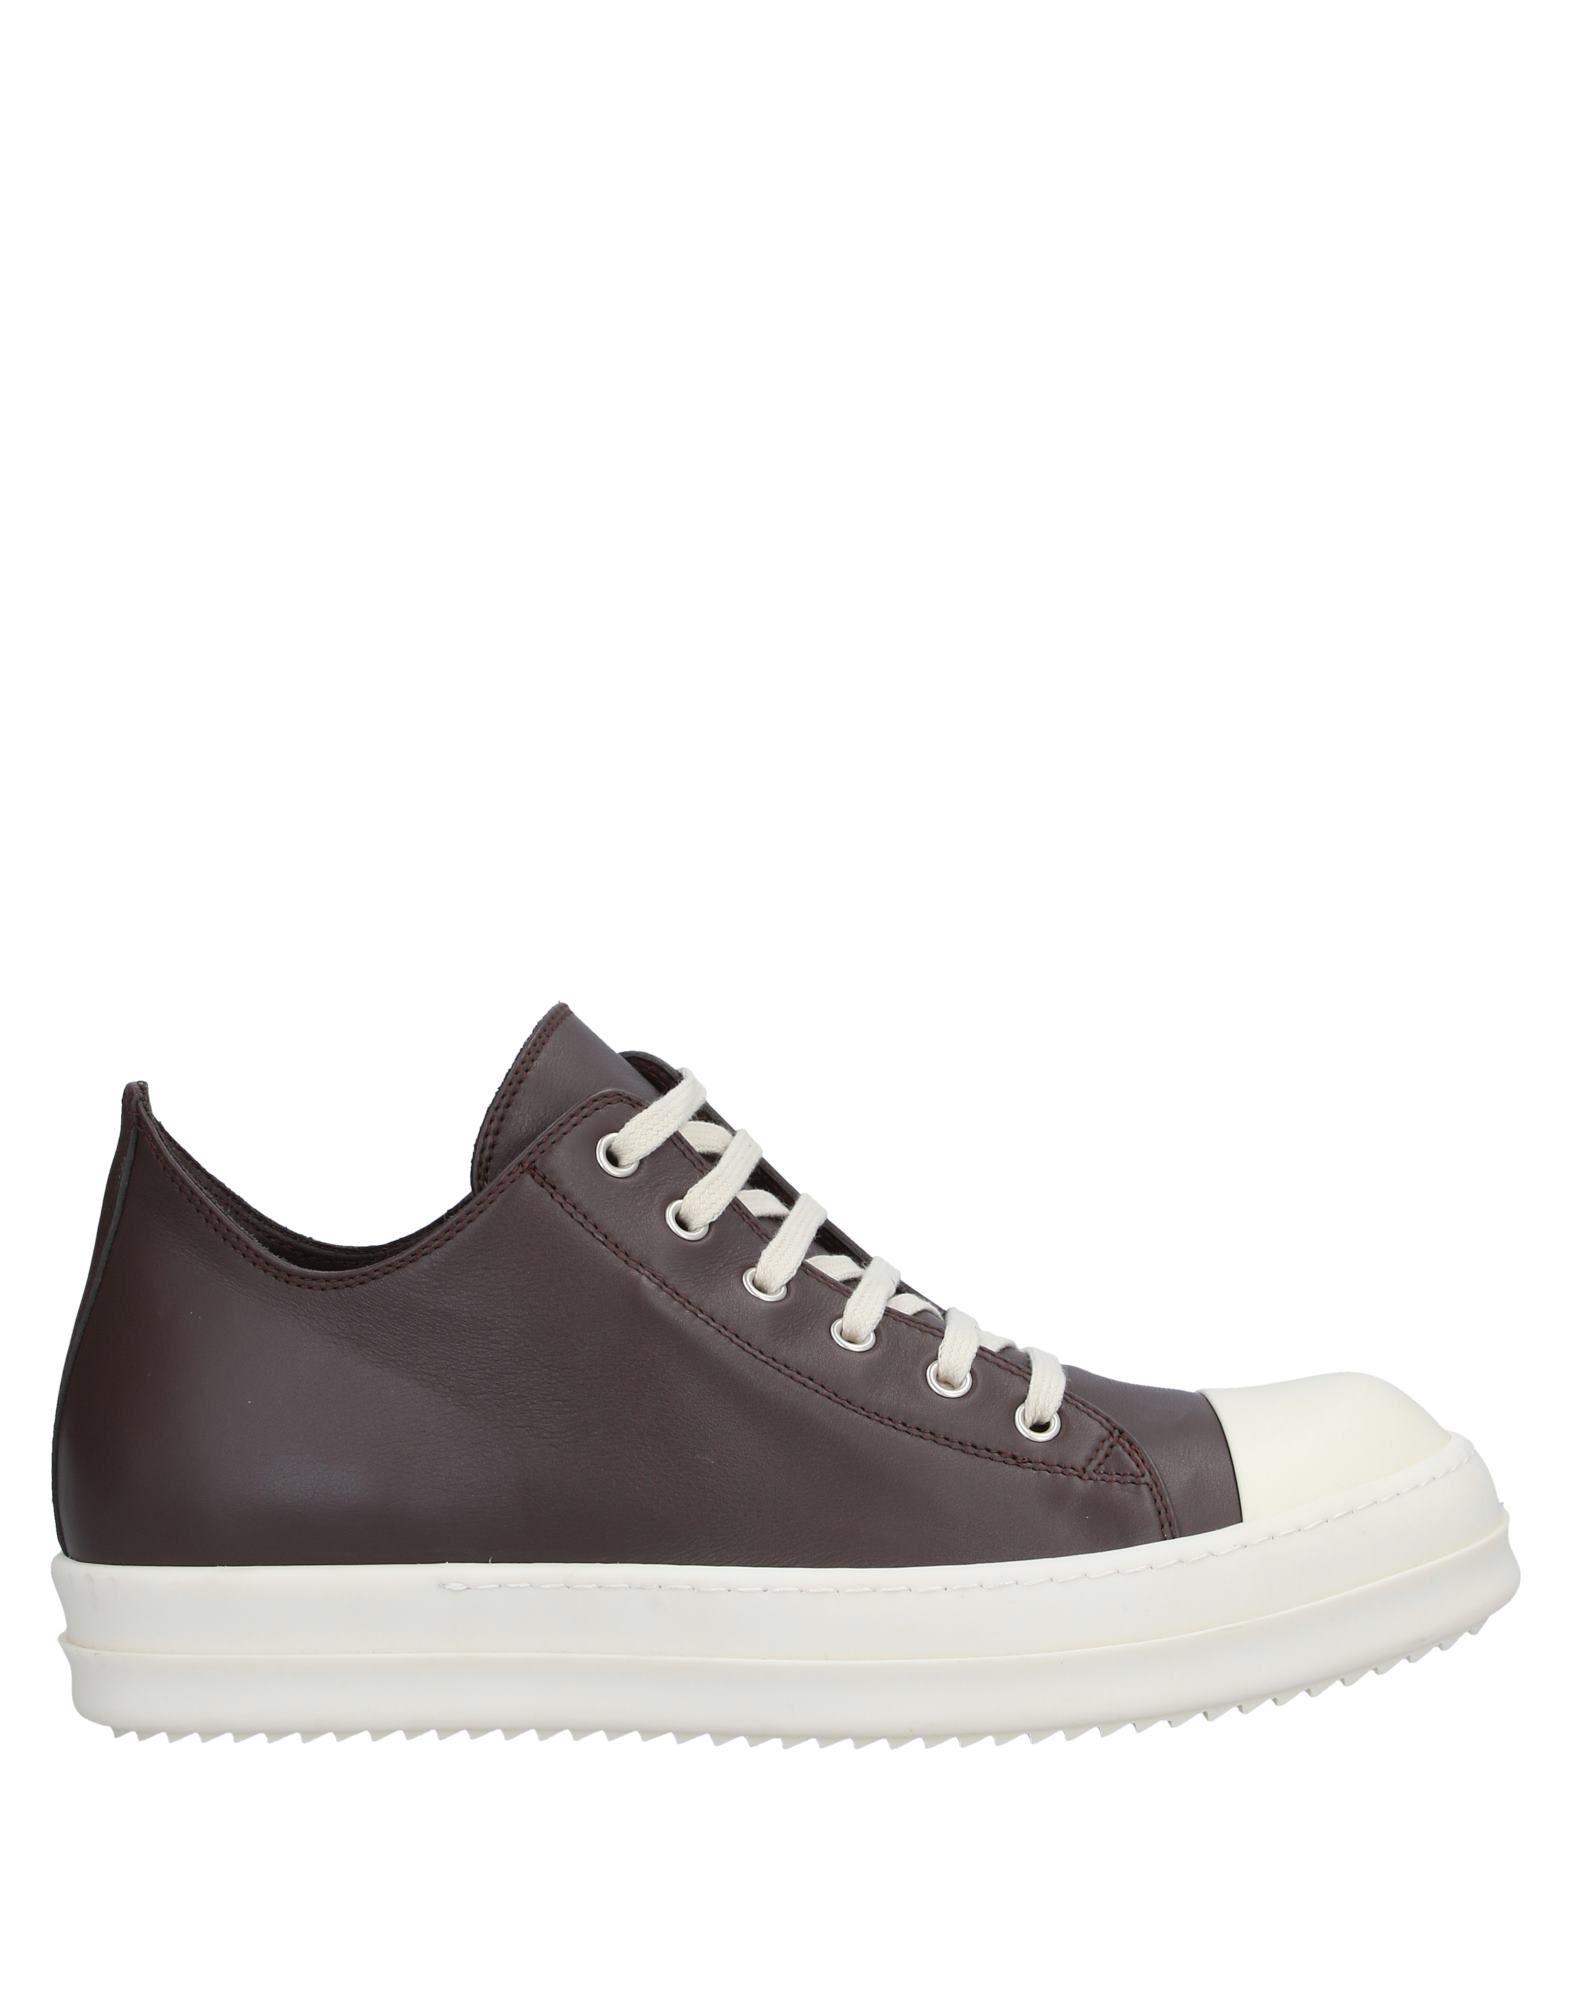 Rick Owens Leather Low-tops & Sneakers for Men - Lyst